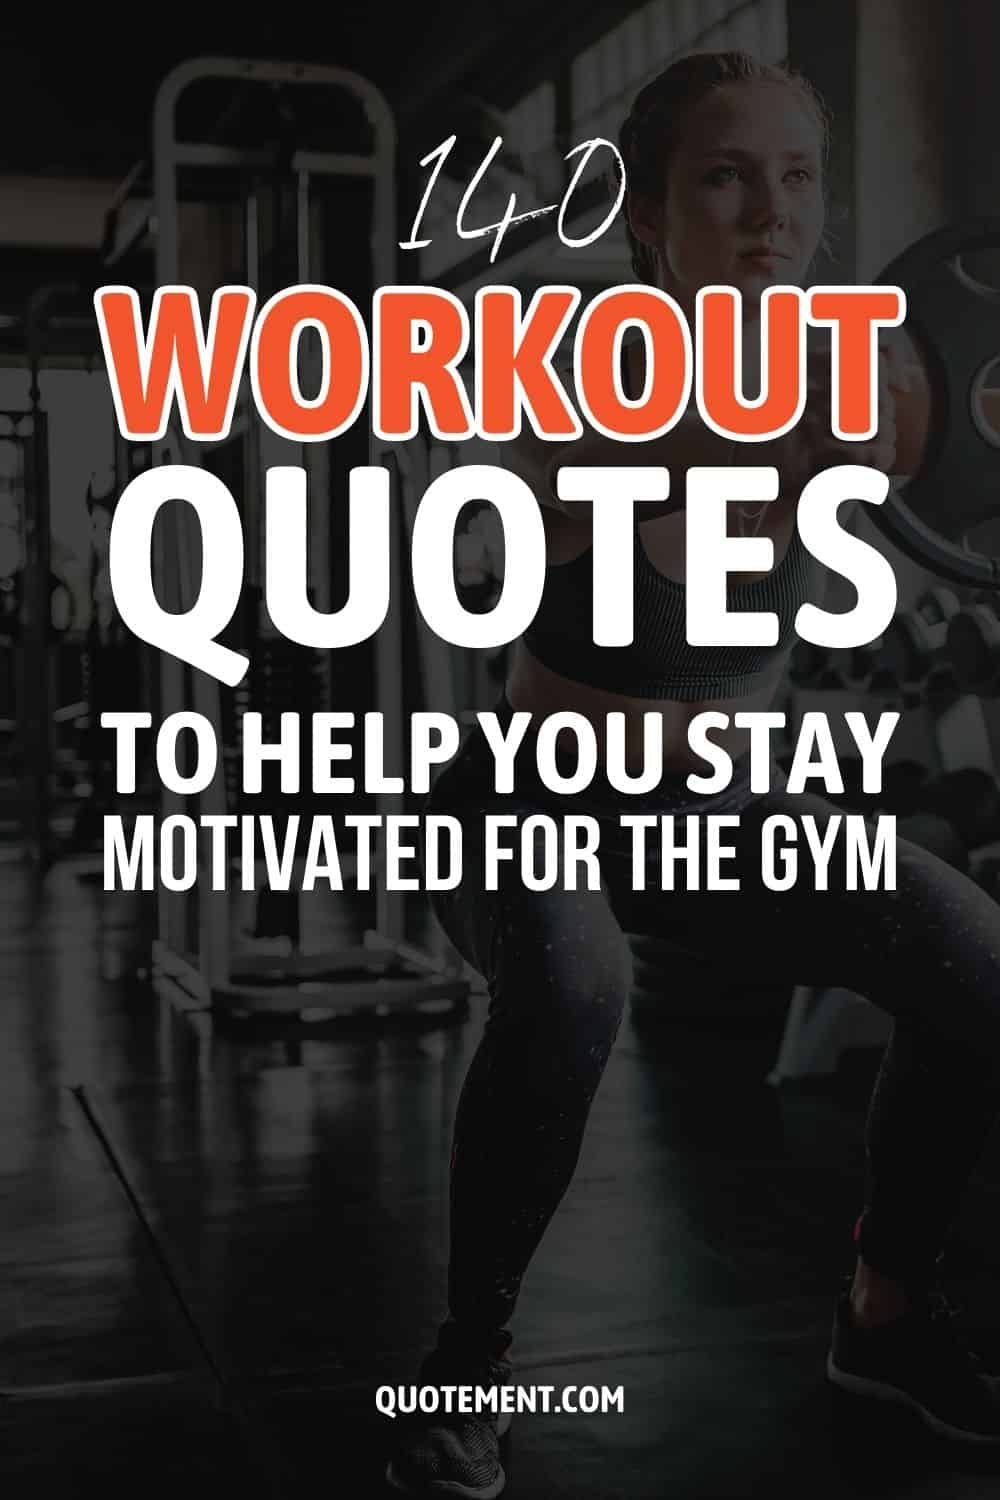 140 Workout Quotes To Help You Stay Motivated For The Gym